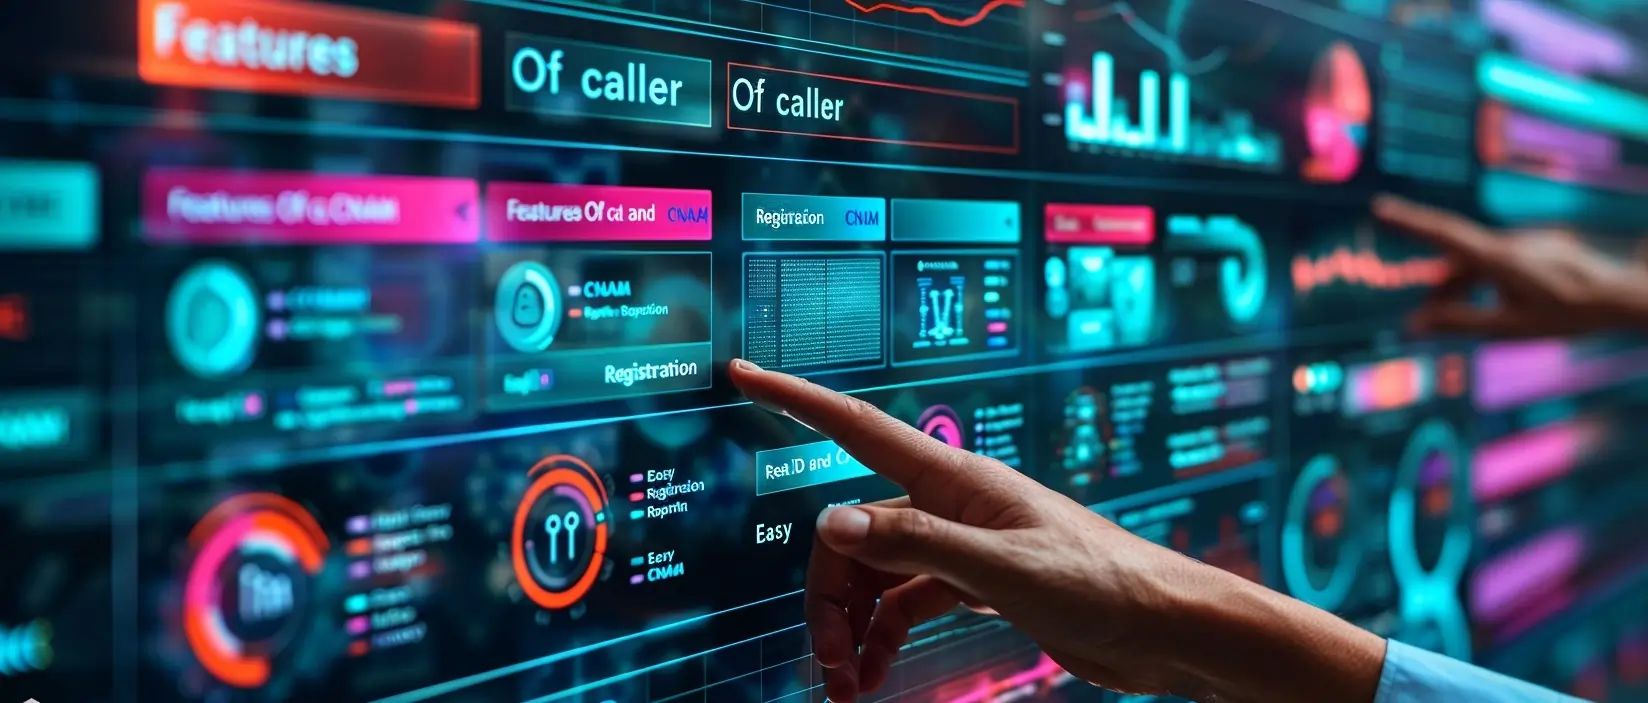 feature of caller ID